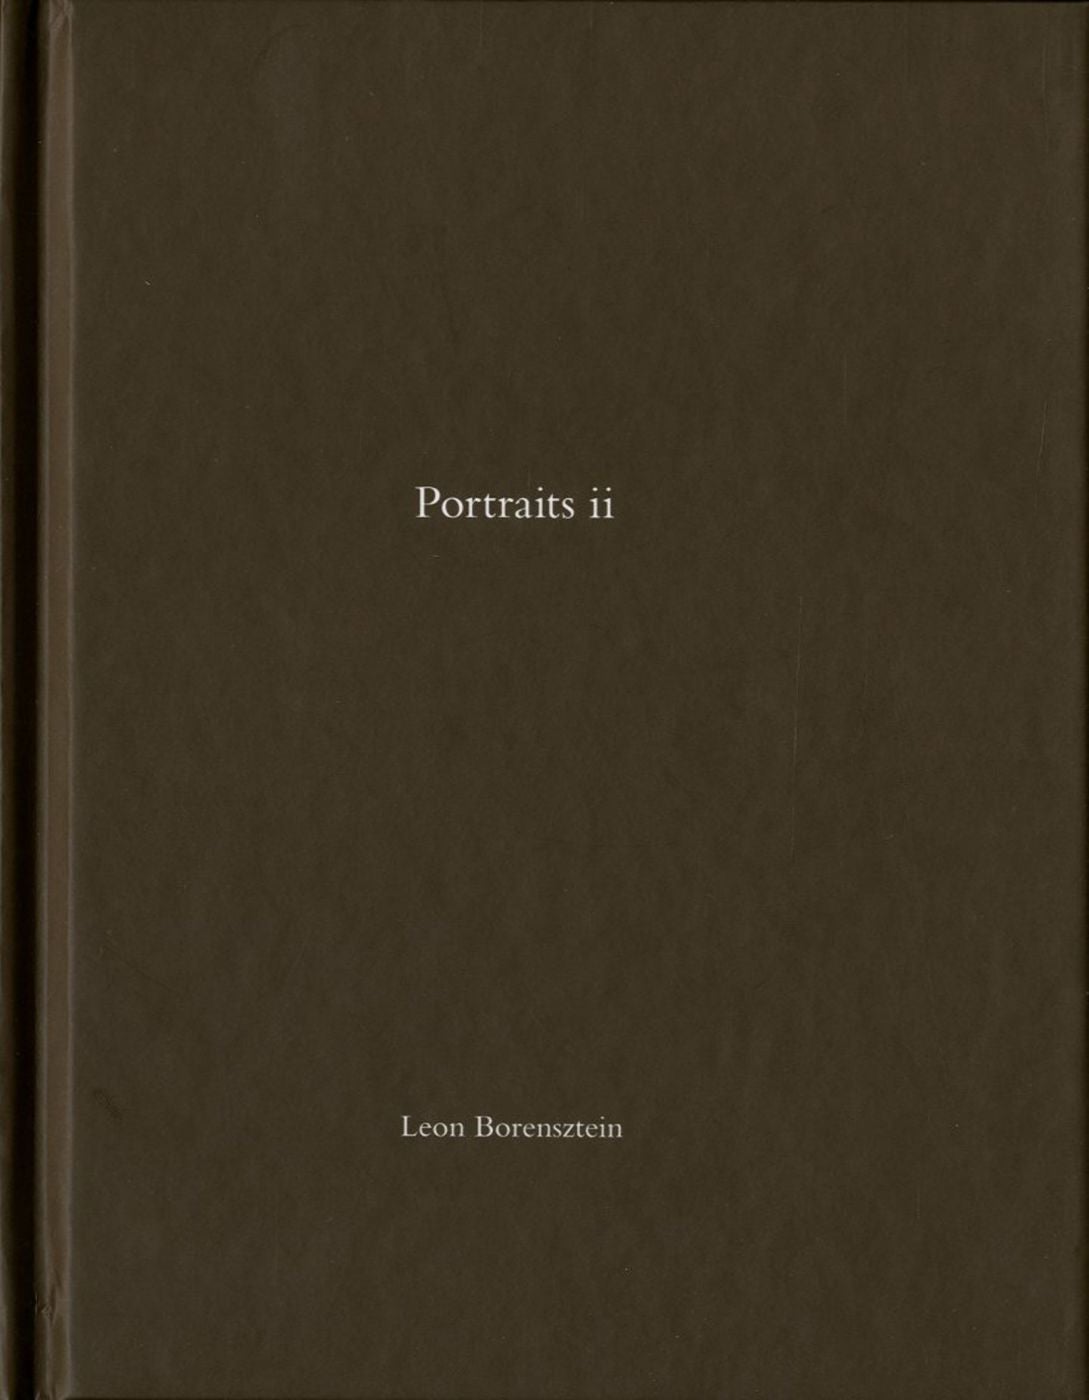 Leon Borensztein: Portraits ii (One Picture Book #76), Limited Edition (with Print)